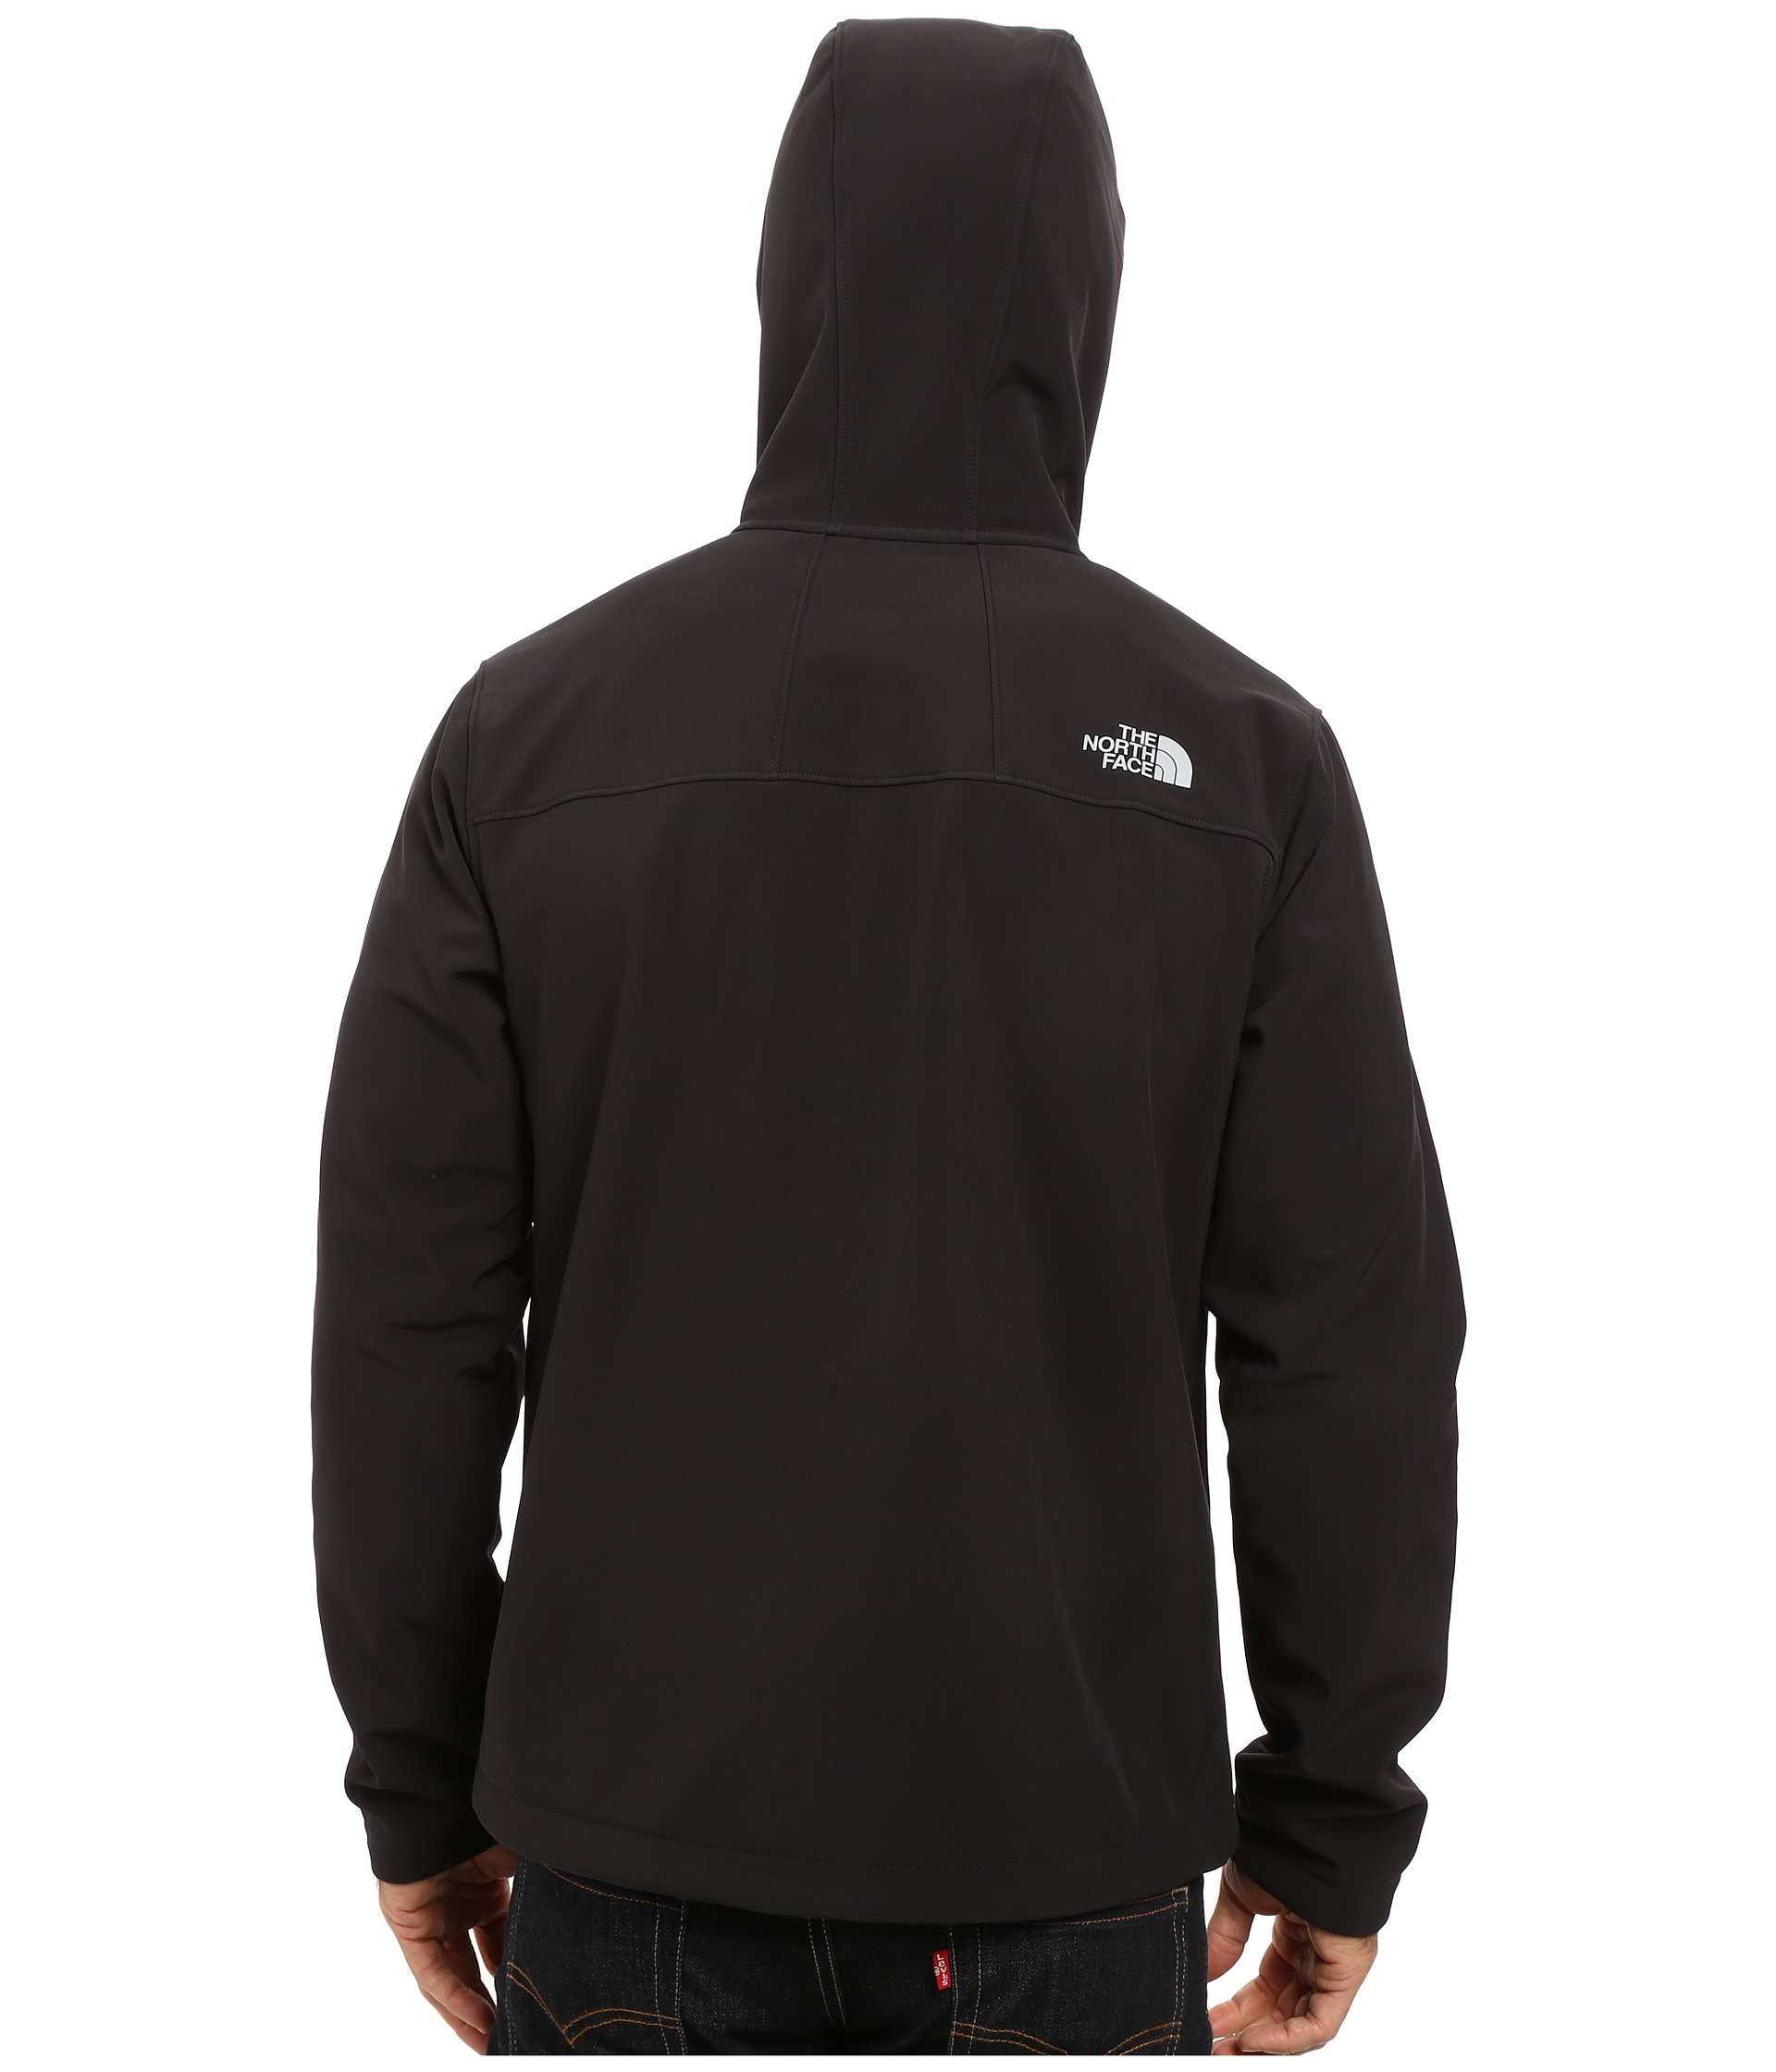 The North Face Apex Bionic 2 Hoodie at Zappos.com